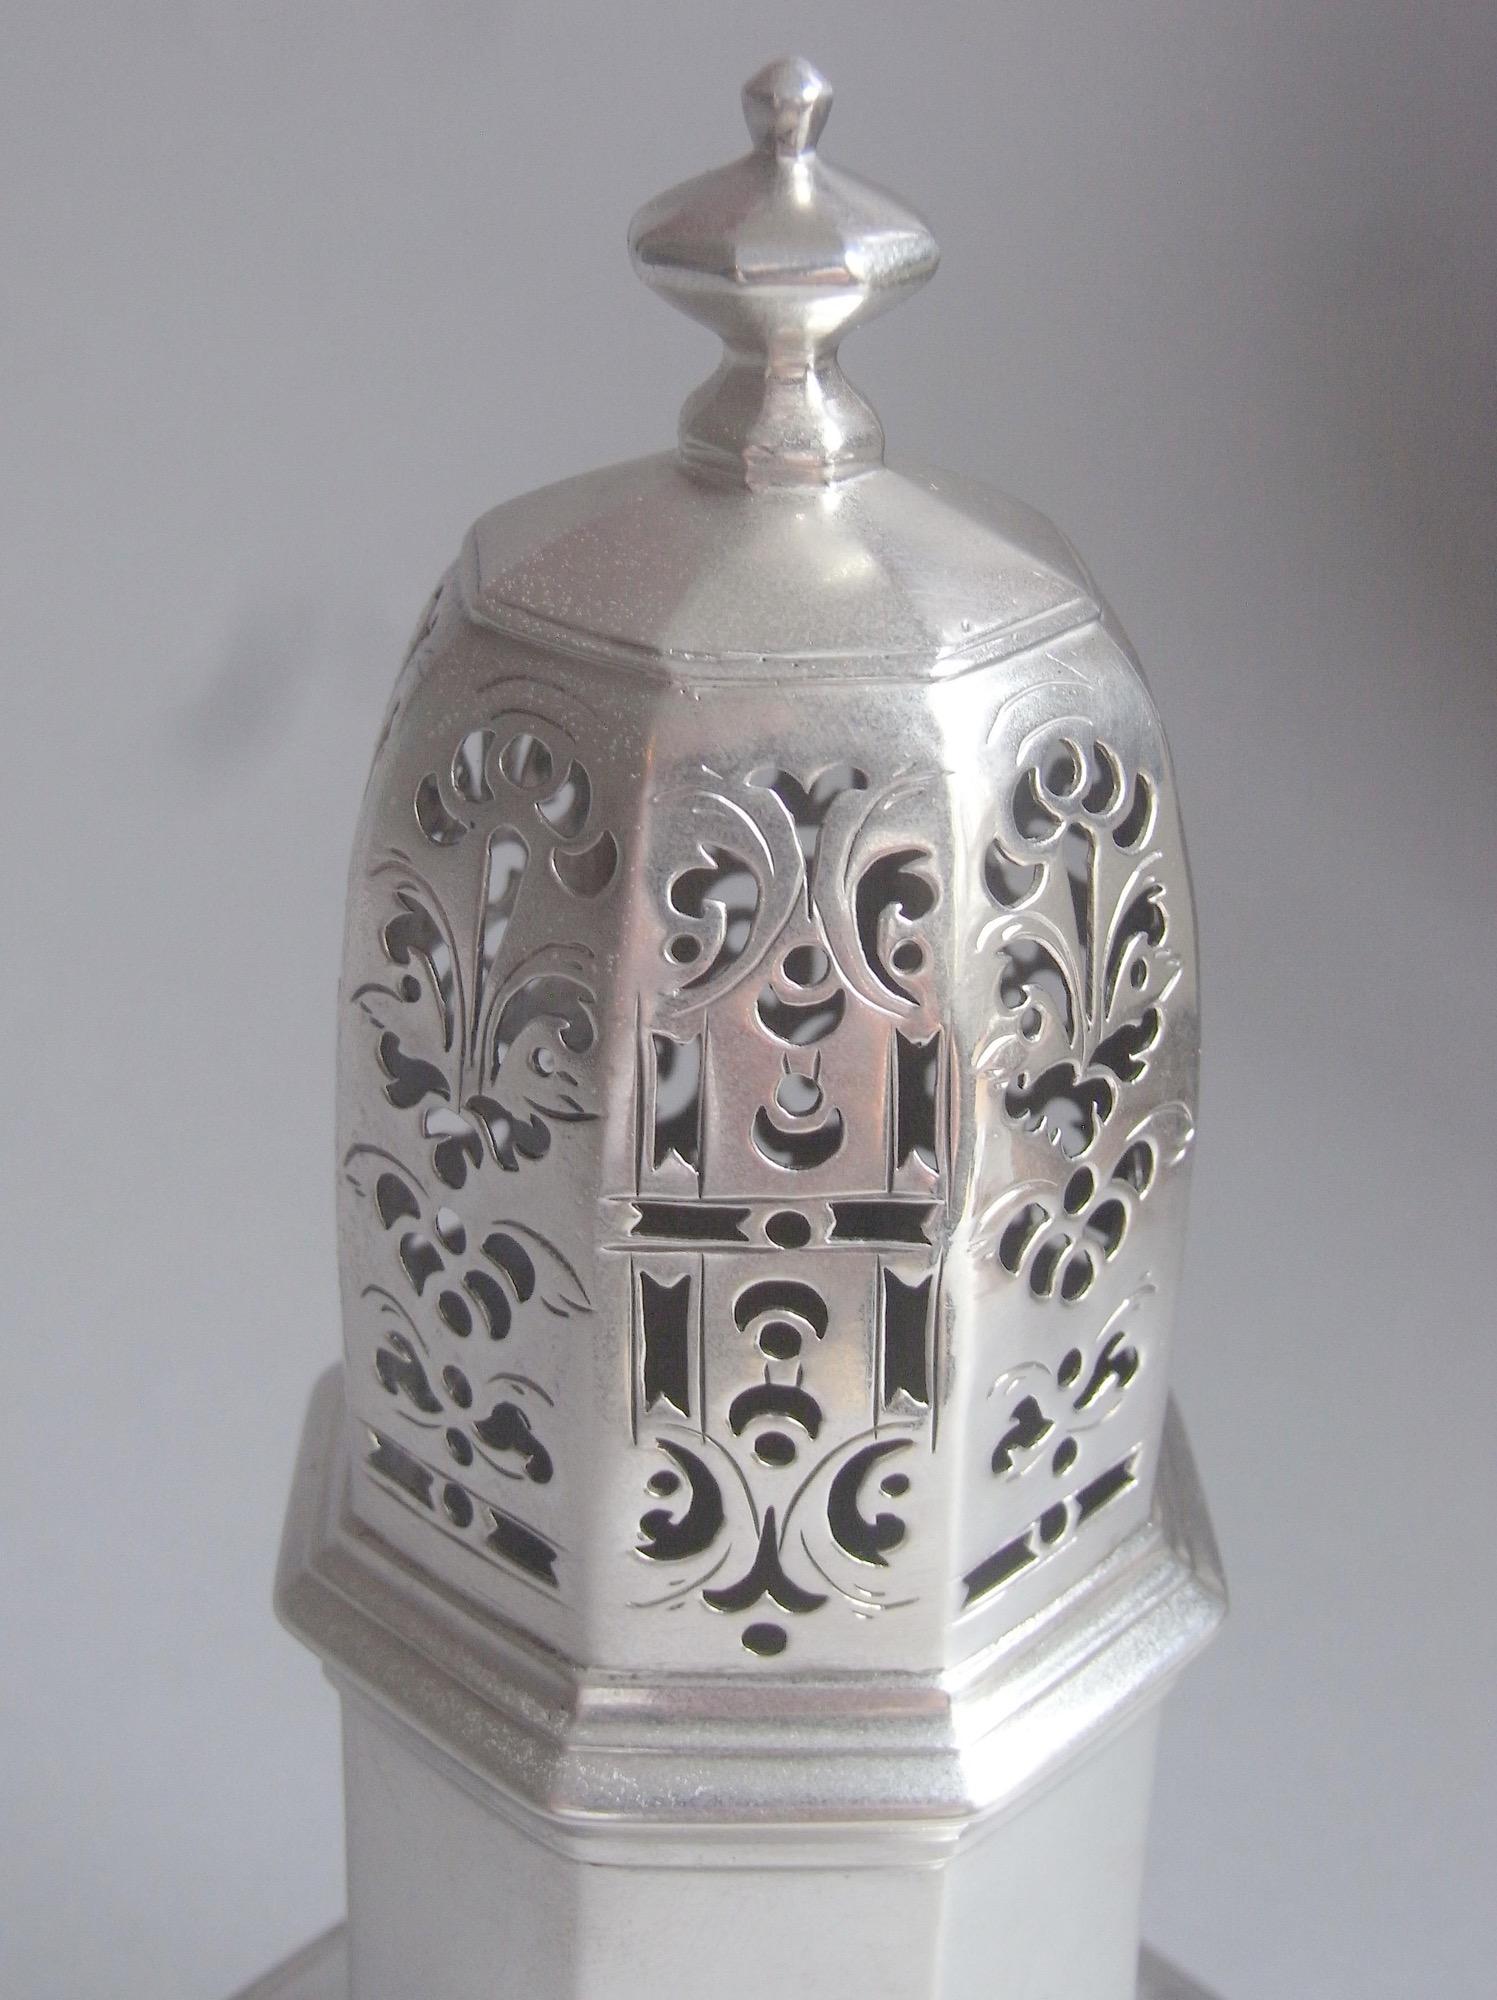 English George I Octagonal Sugar Caster Made in London by Thomas Bamford I in 1726. For Sale